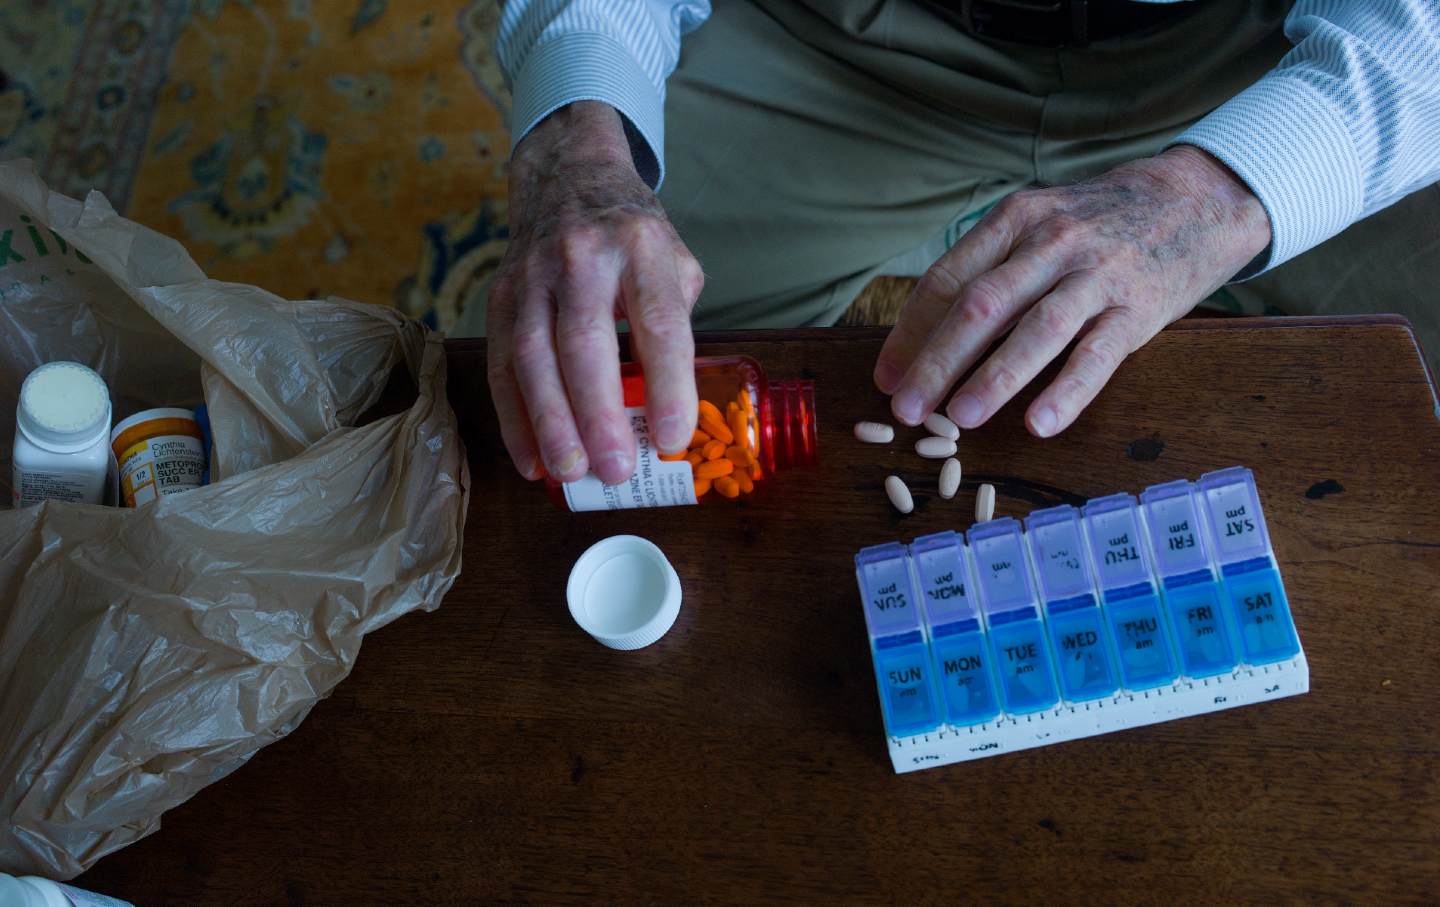 Charles Miller, 90, prepares the daily pills his wife needs in early 2020.